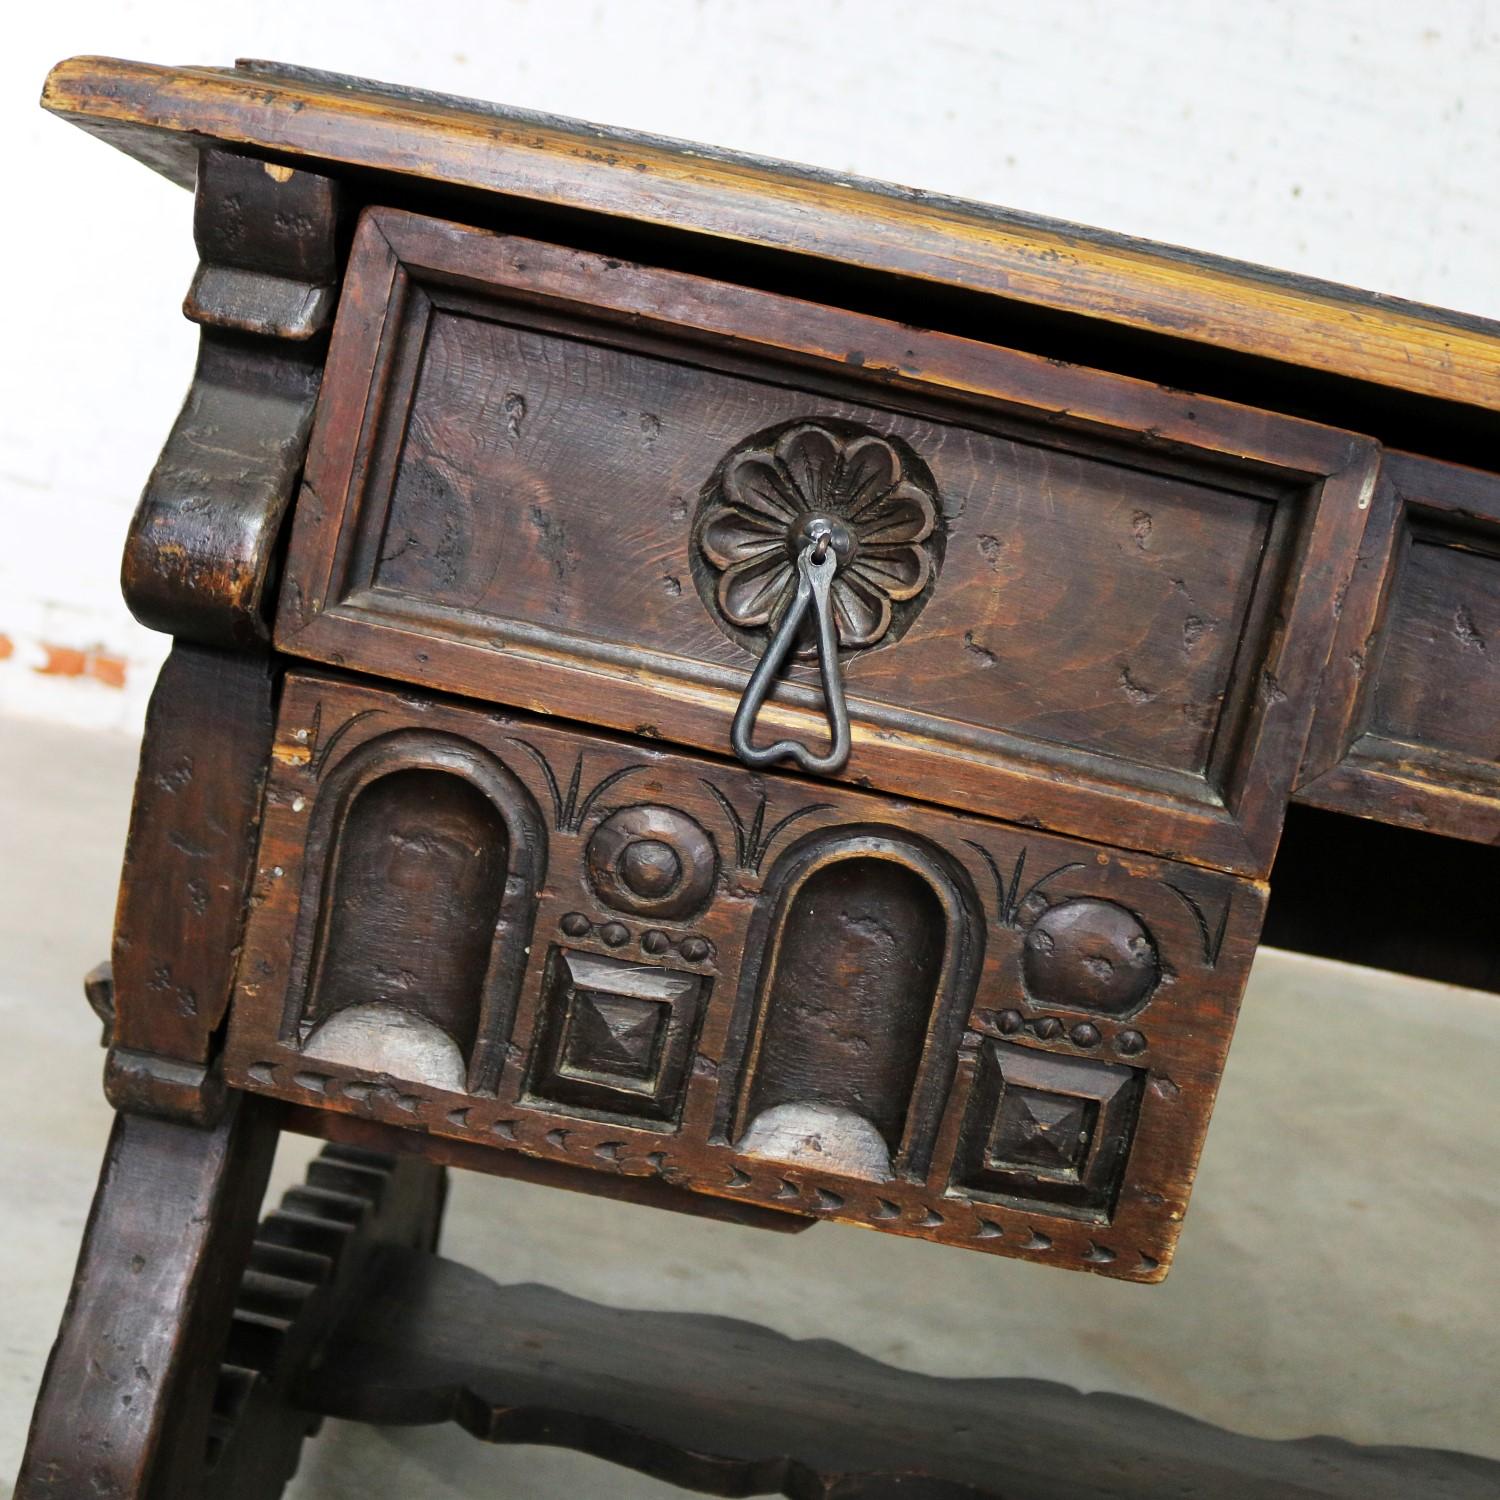 Spanish Revival Style Desk with Handwrought Hardware by Artes De Mexico 7